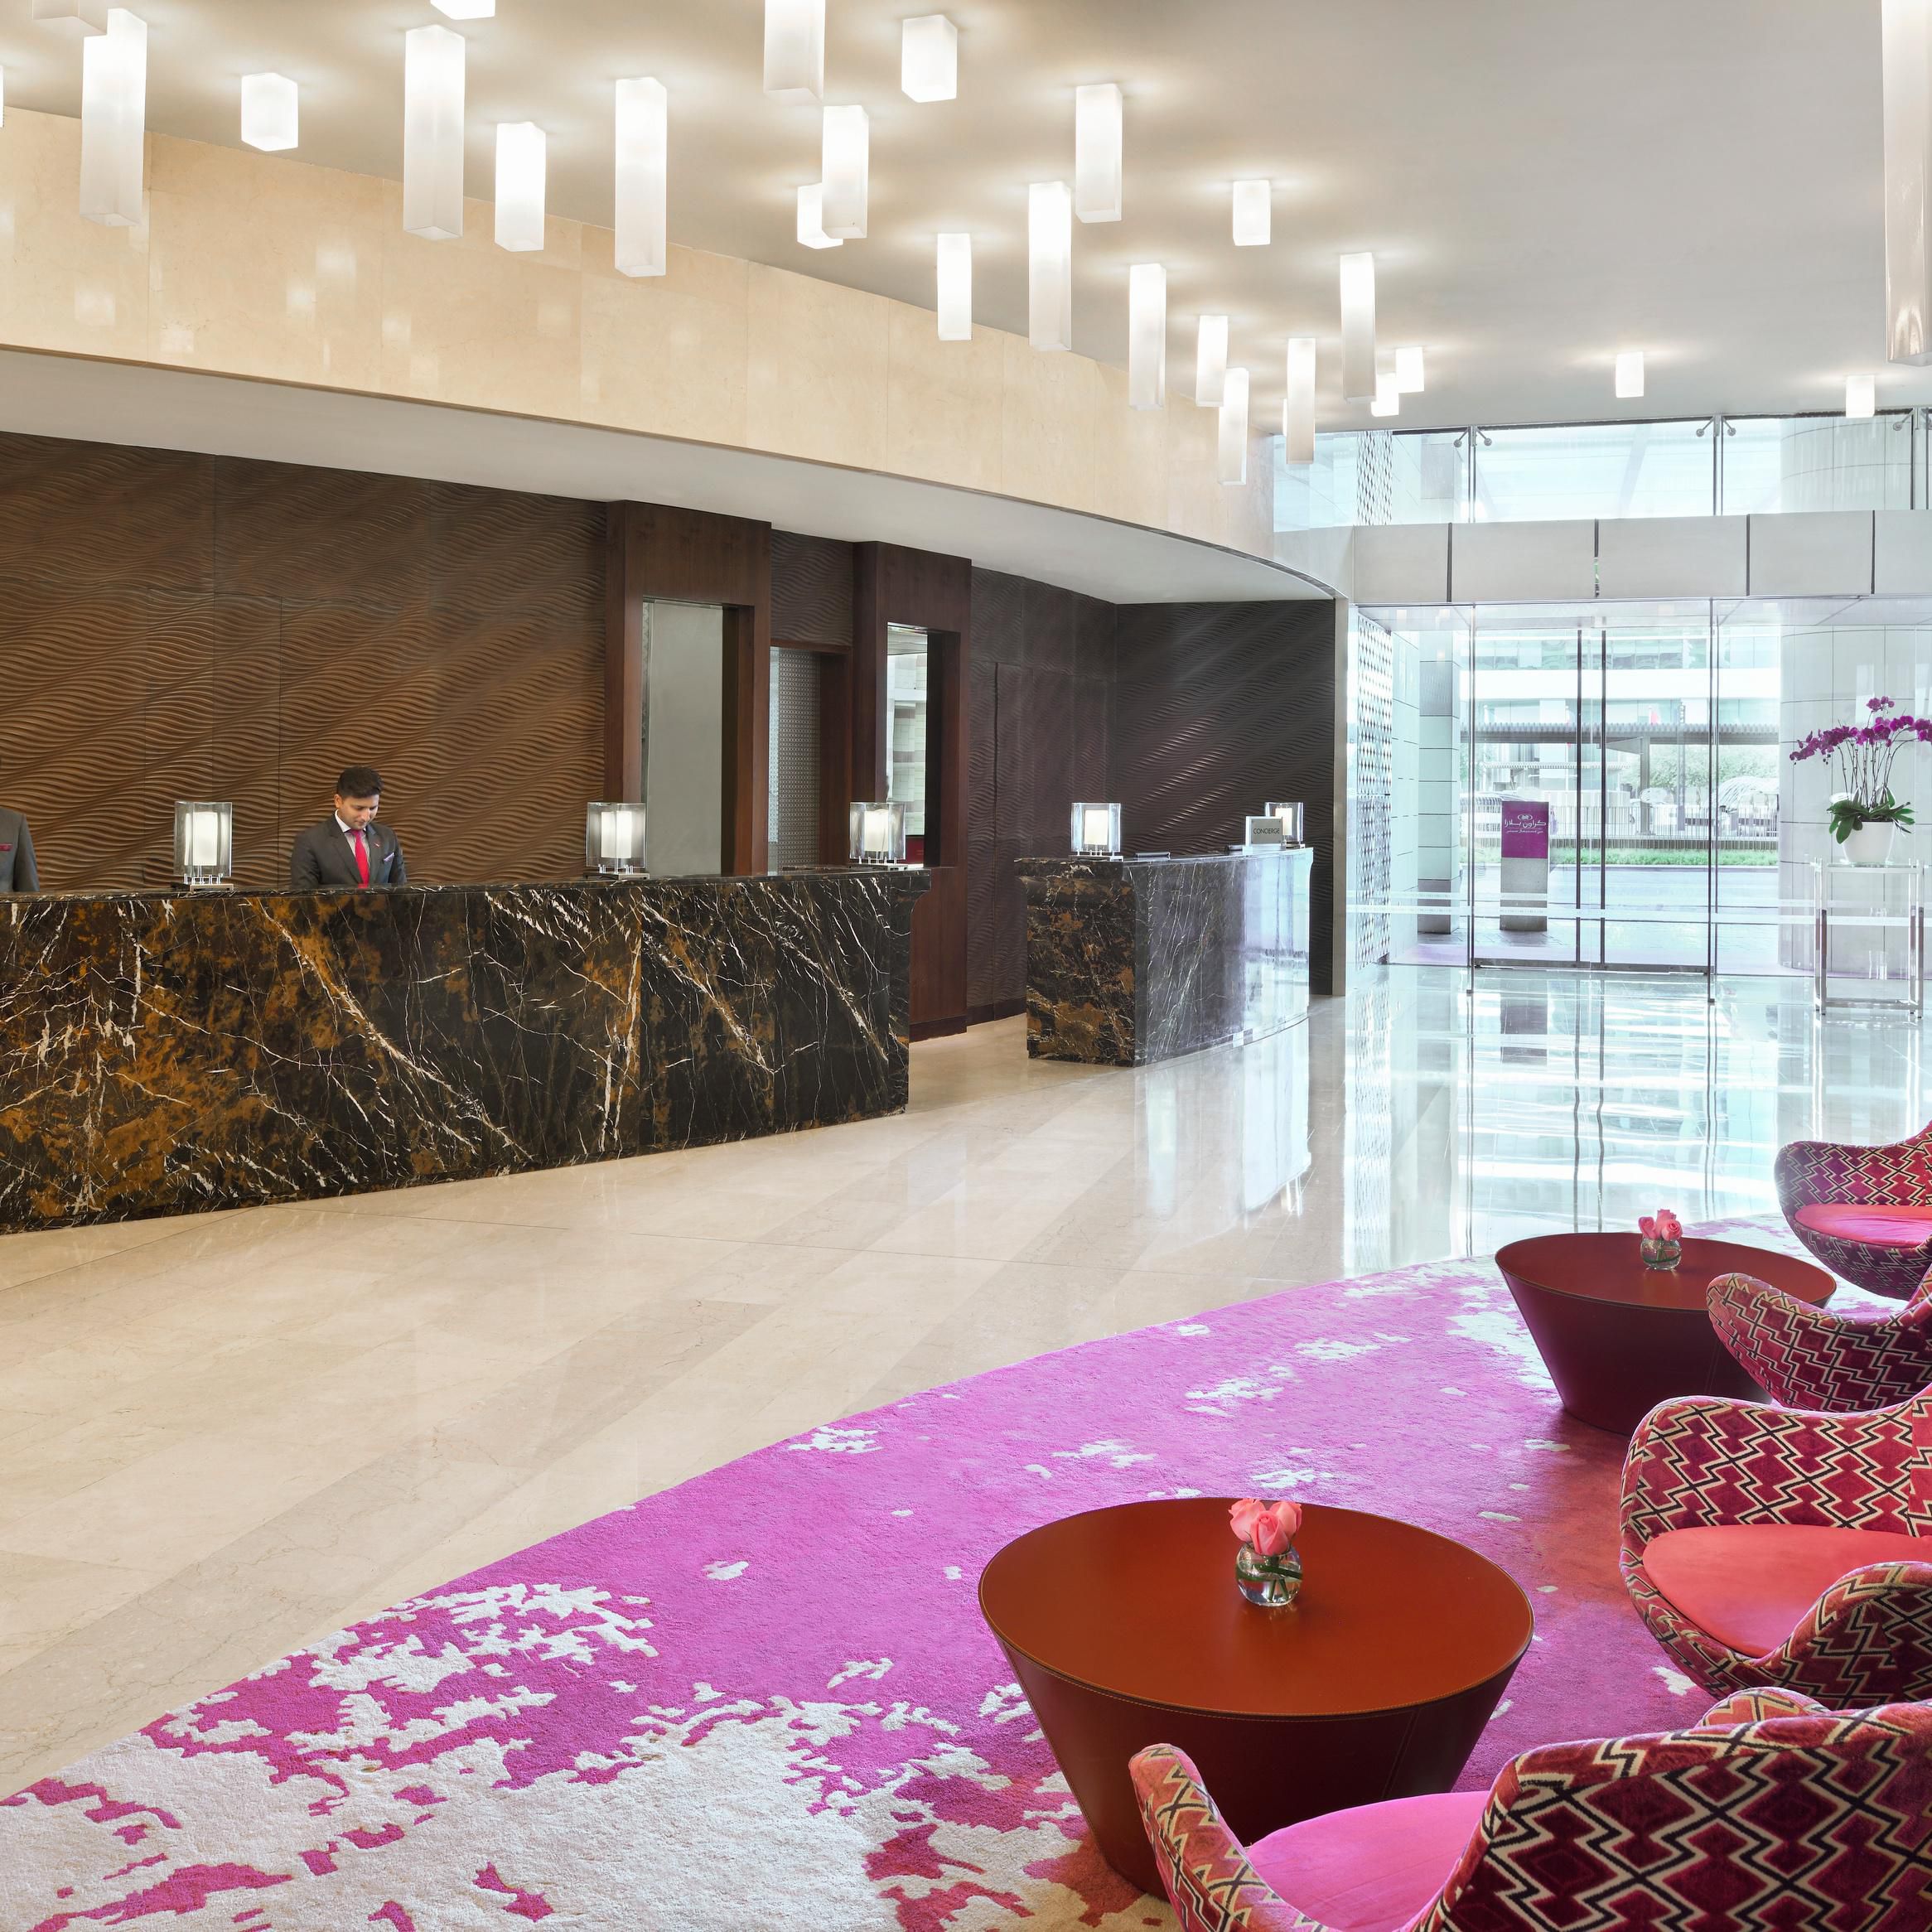 Bright and spacious lobby to welcome you